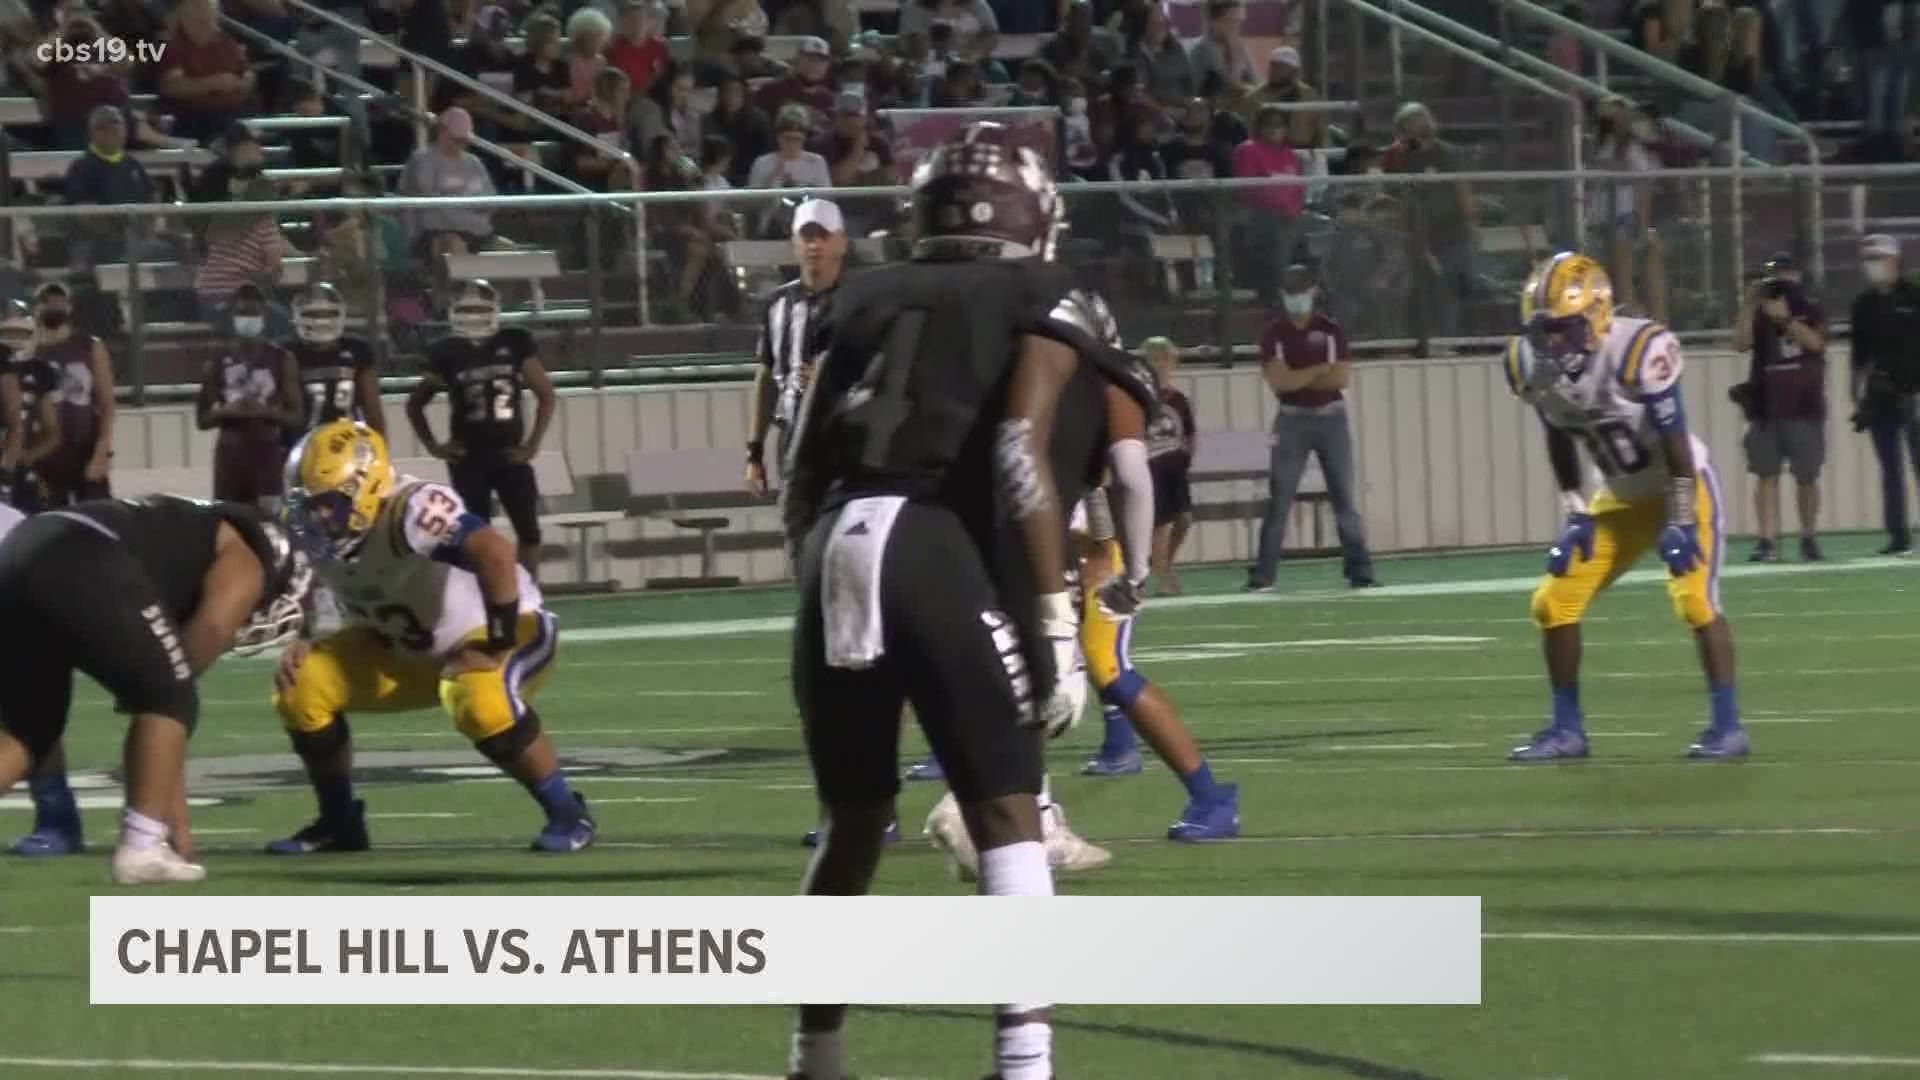 The Chapel Hill Bulldogs traveled to Athens to take on the Hornets in Week 5 of the Texas high school football season.